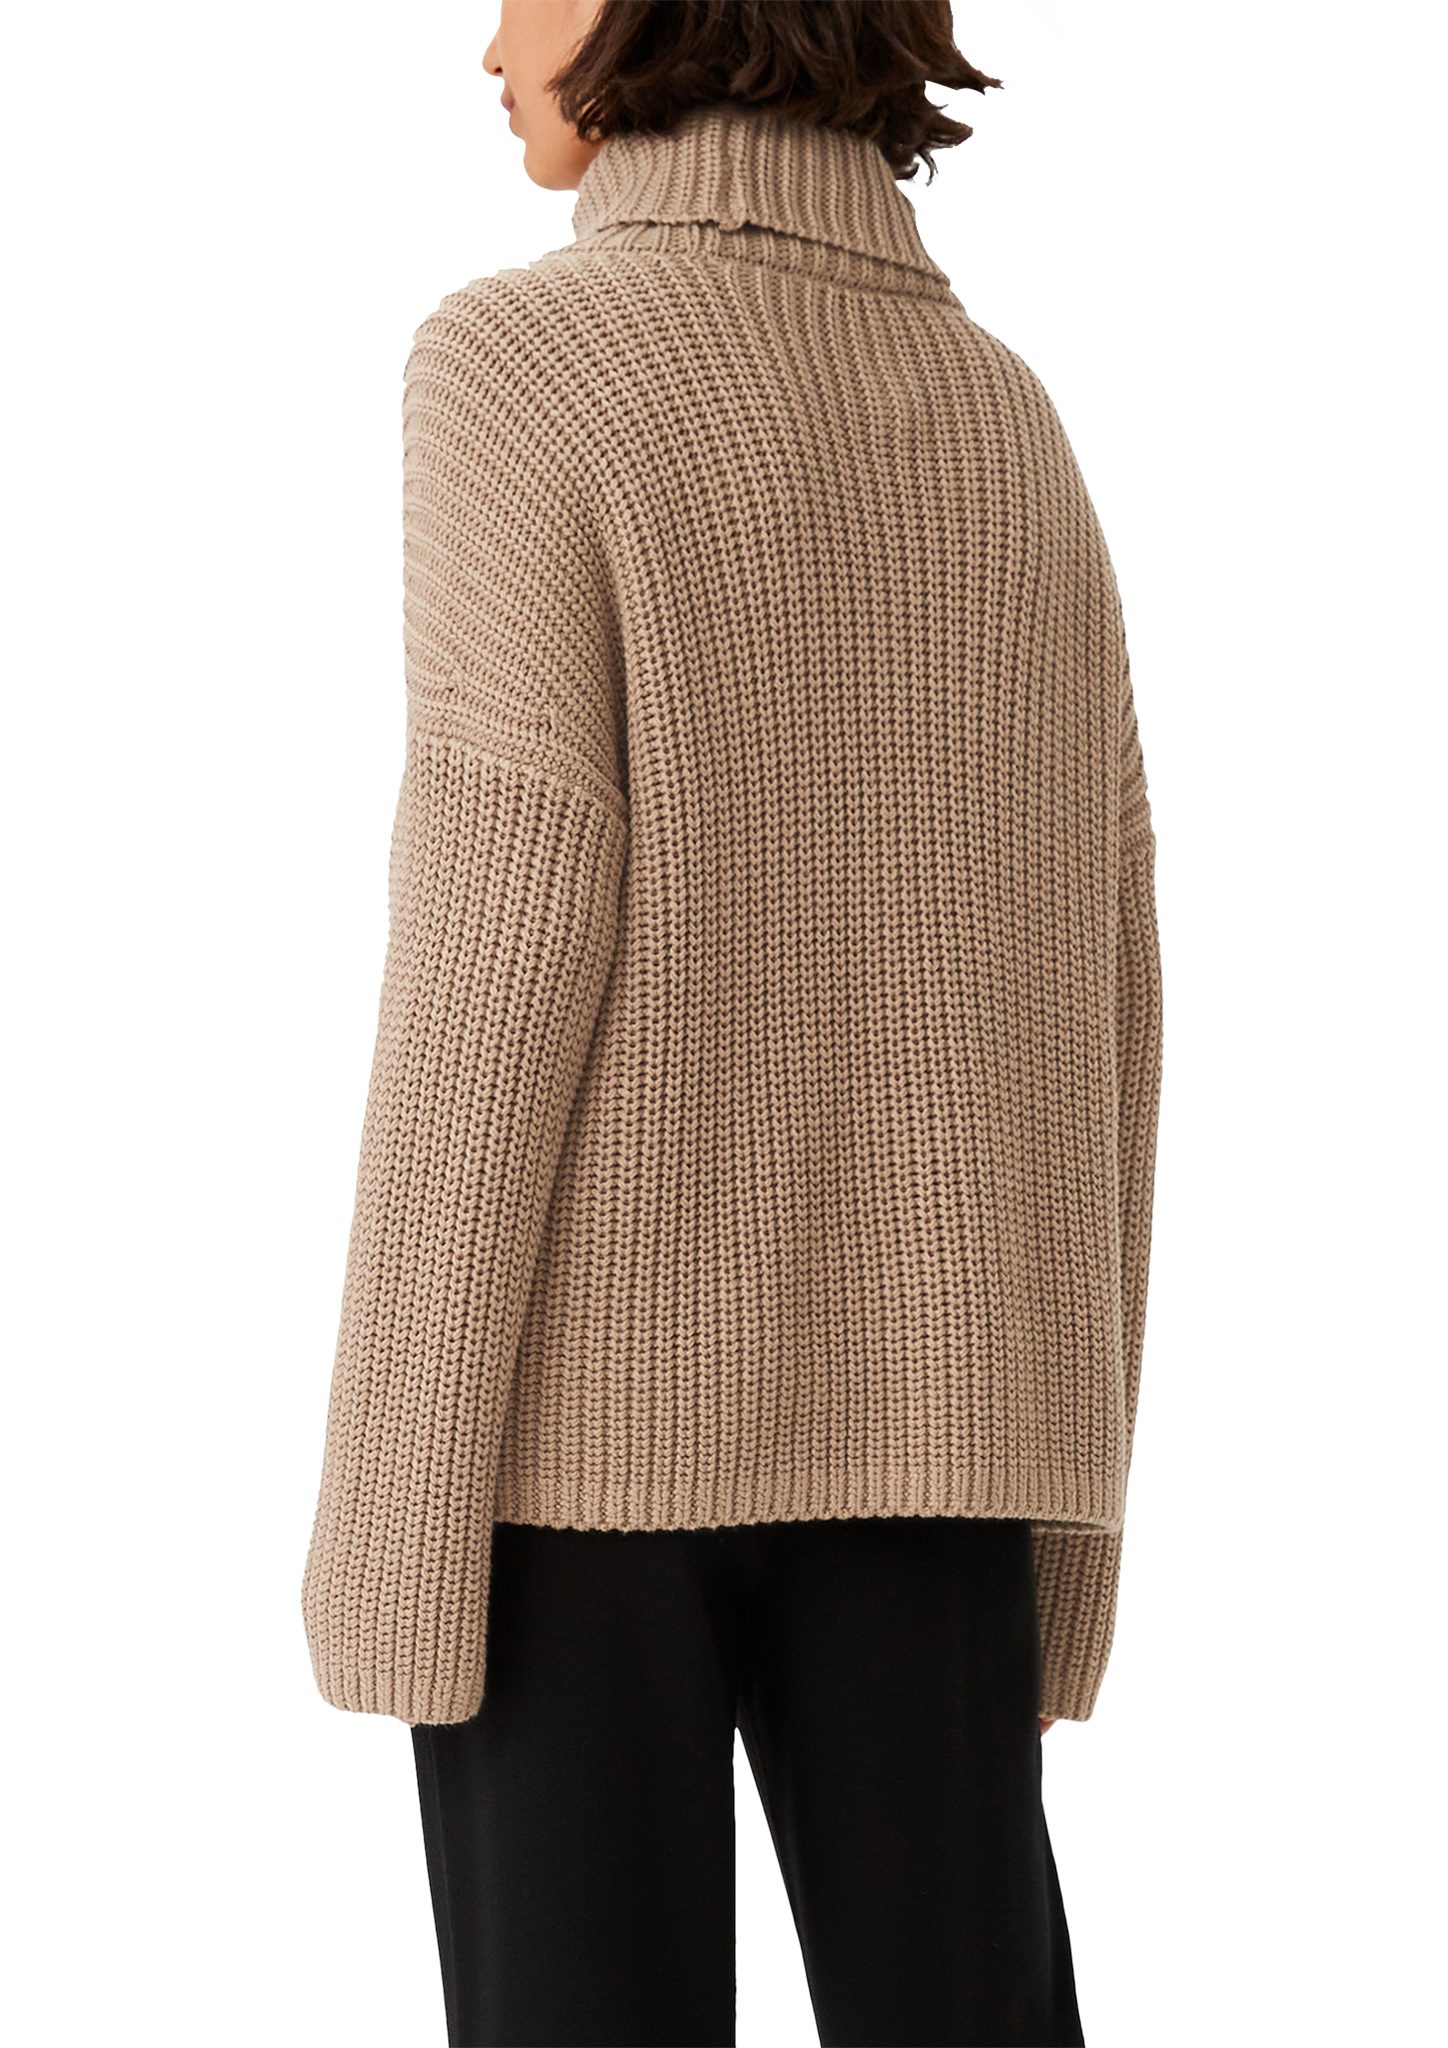 casual Label-Patch Rippstrickpullover mit identity Label-Patch sandstein Langarmshirt comma